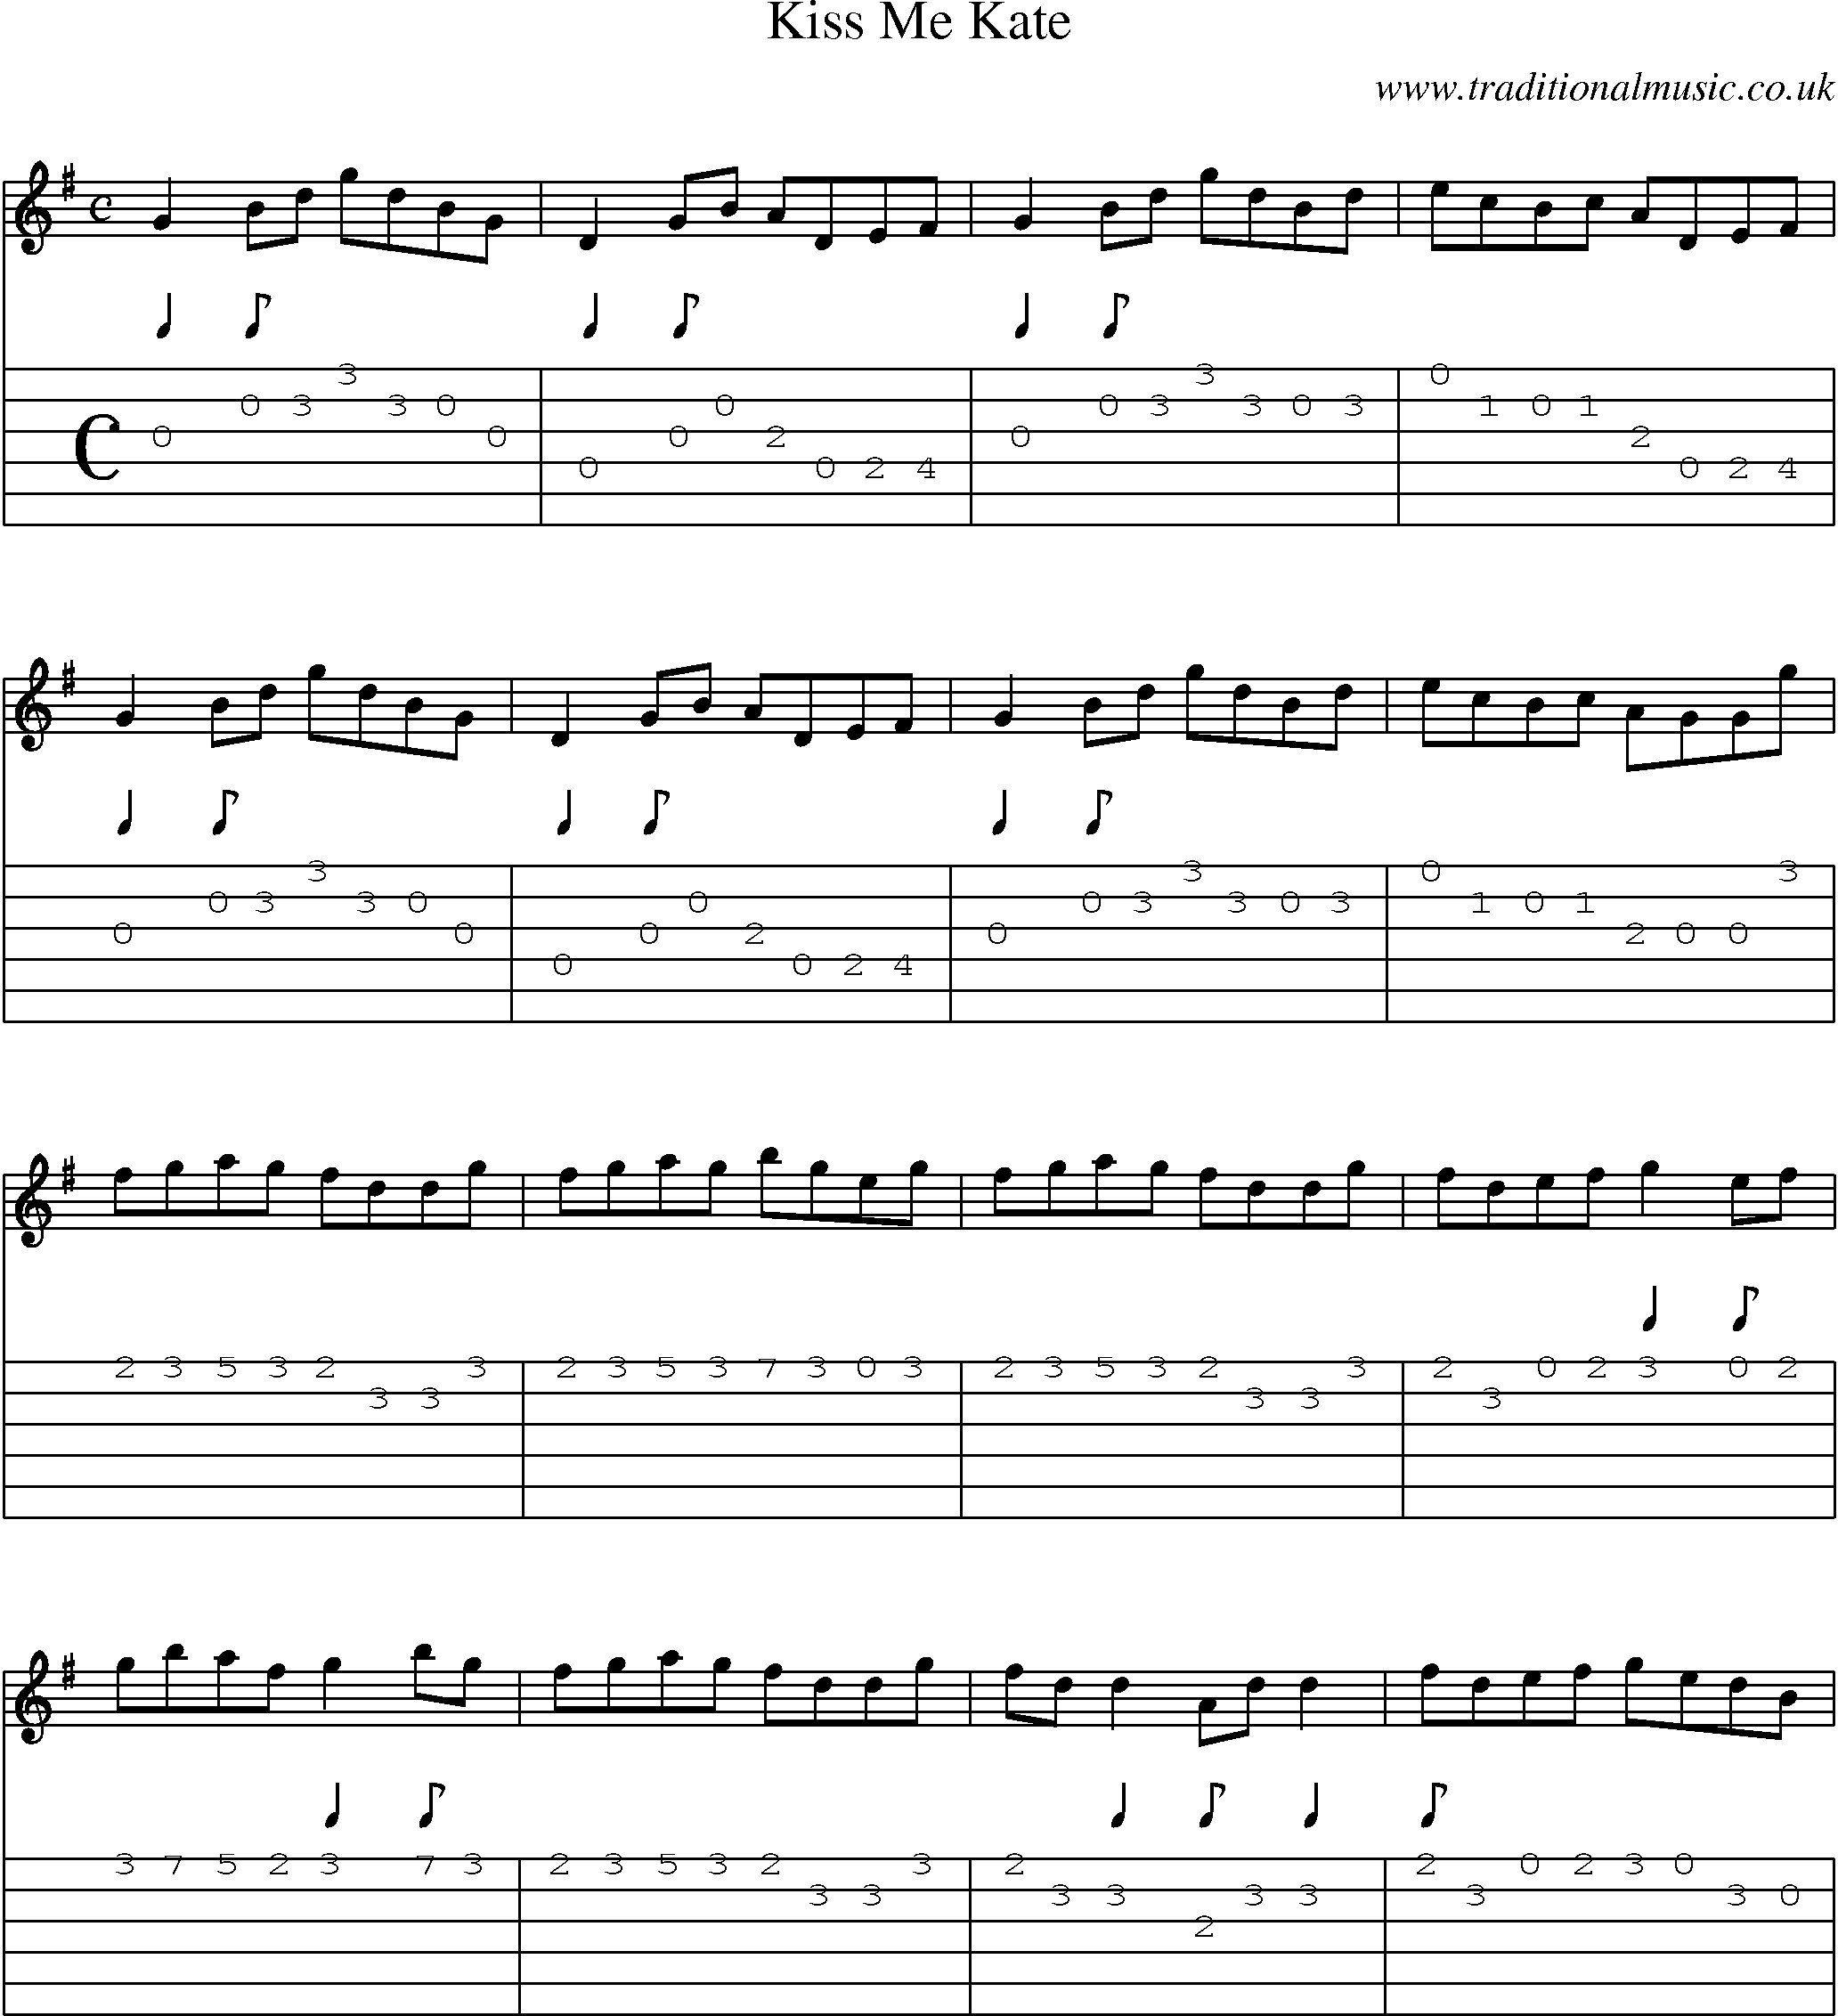 Music Score and Guitar Tabs for Kiss Me Kate